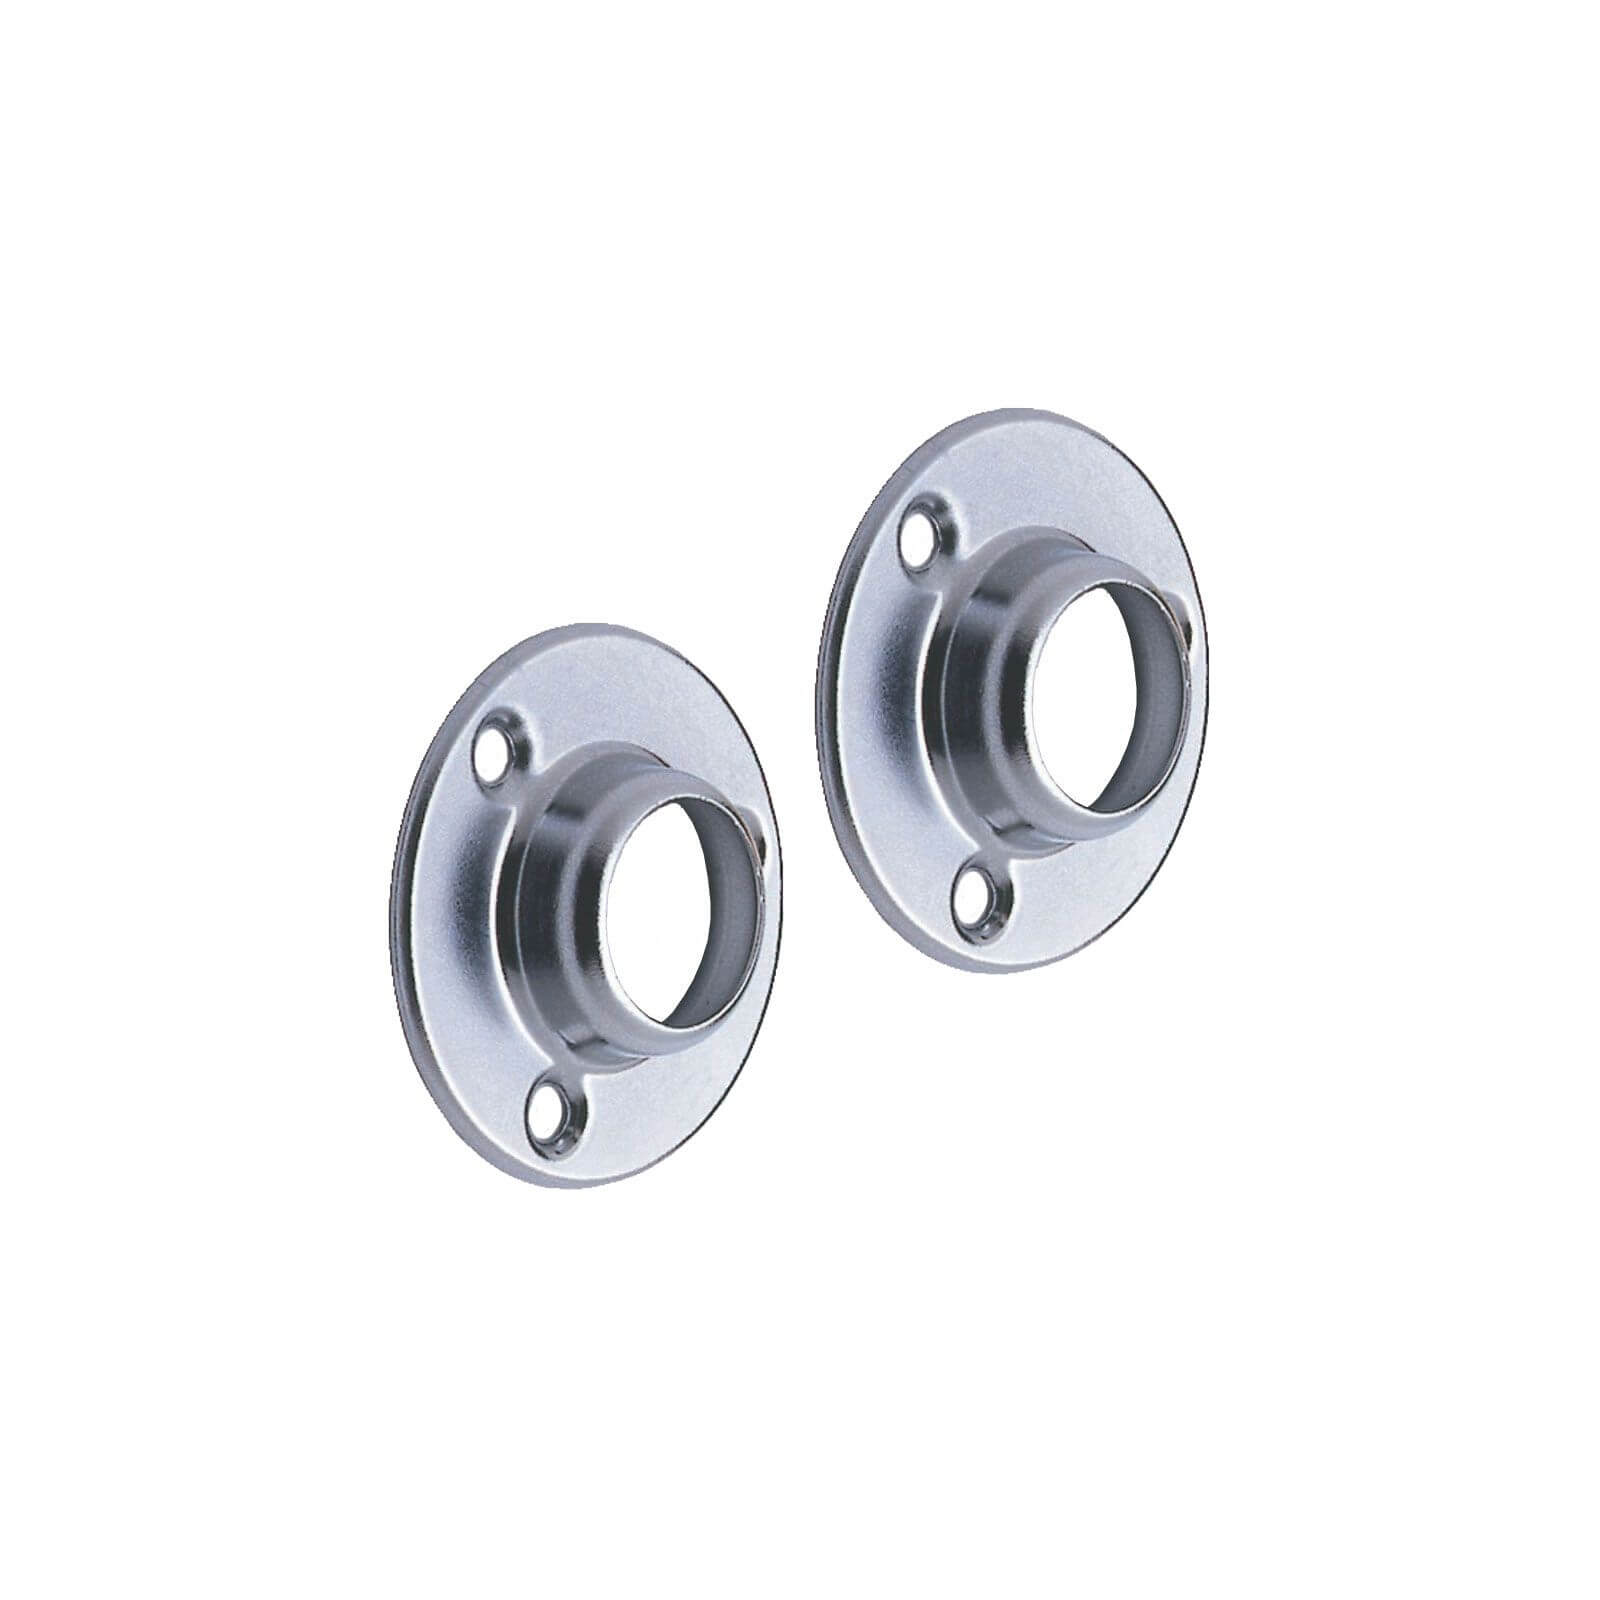 Deluxe Sockets - Chrome Plated -25mm